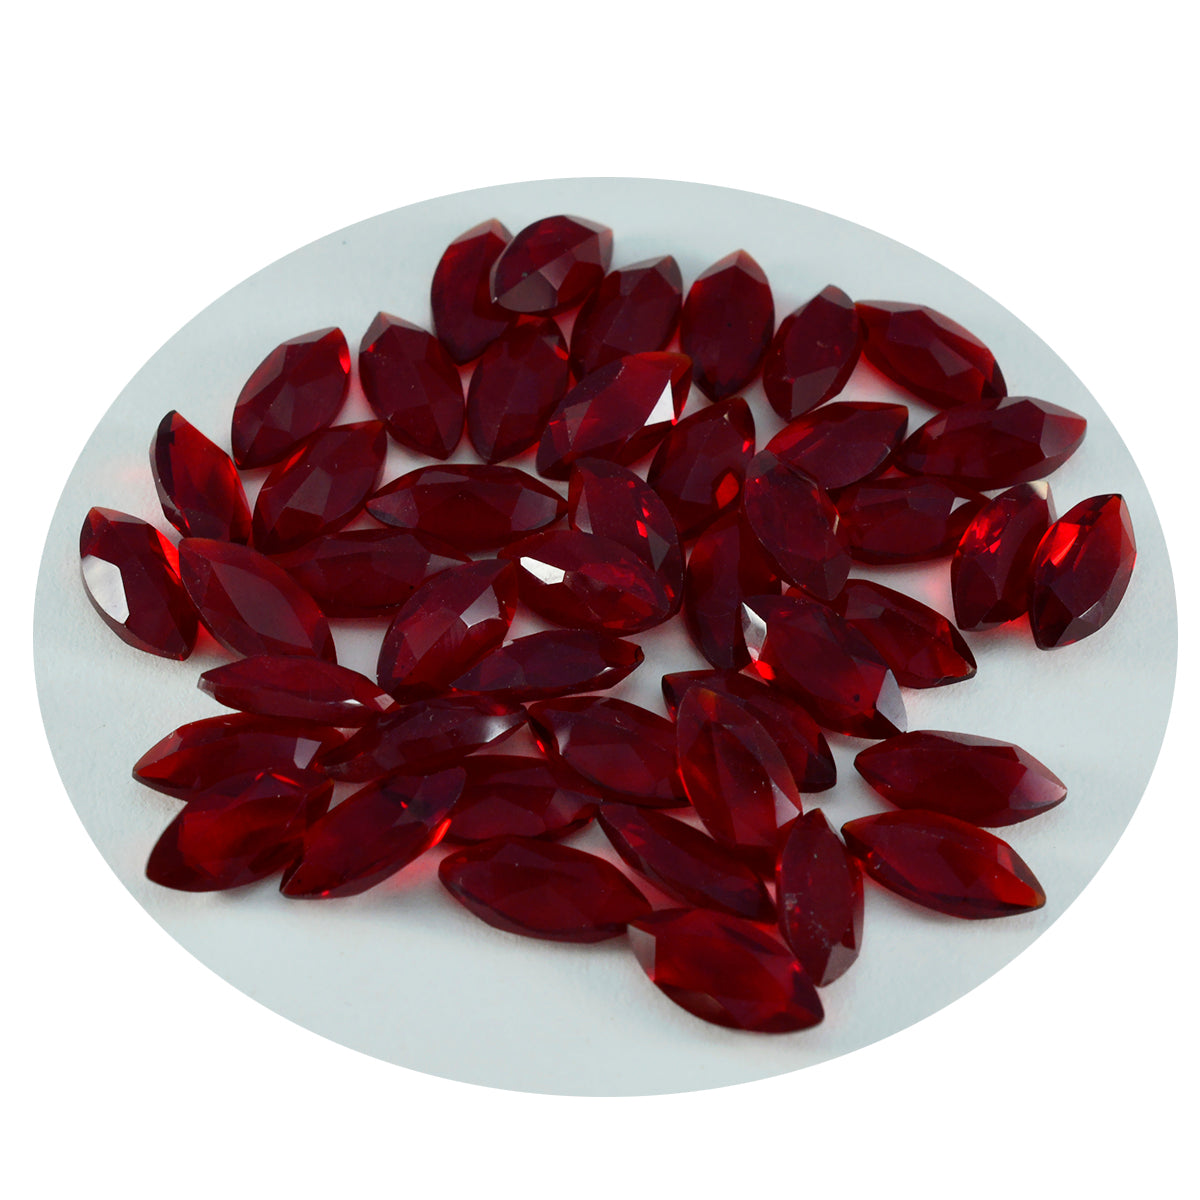 Riyogems 1PC Red Ruby CZ Faceted 2.5x5 mm Marquise Shape A+ Quality Loose Gem